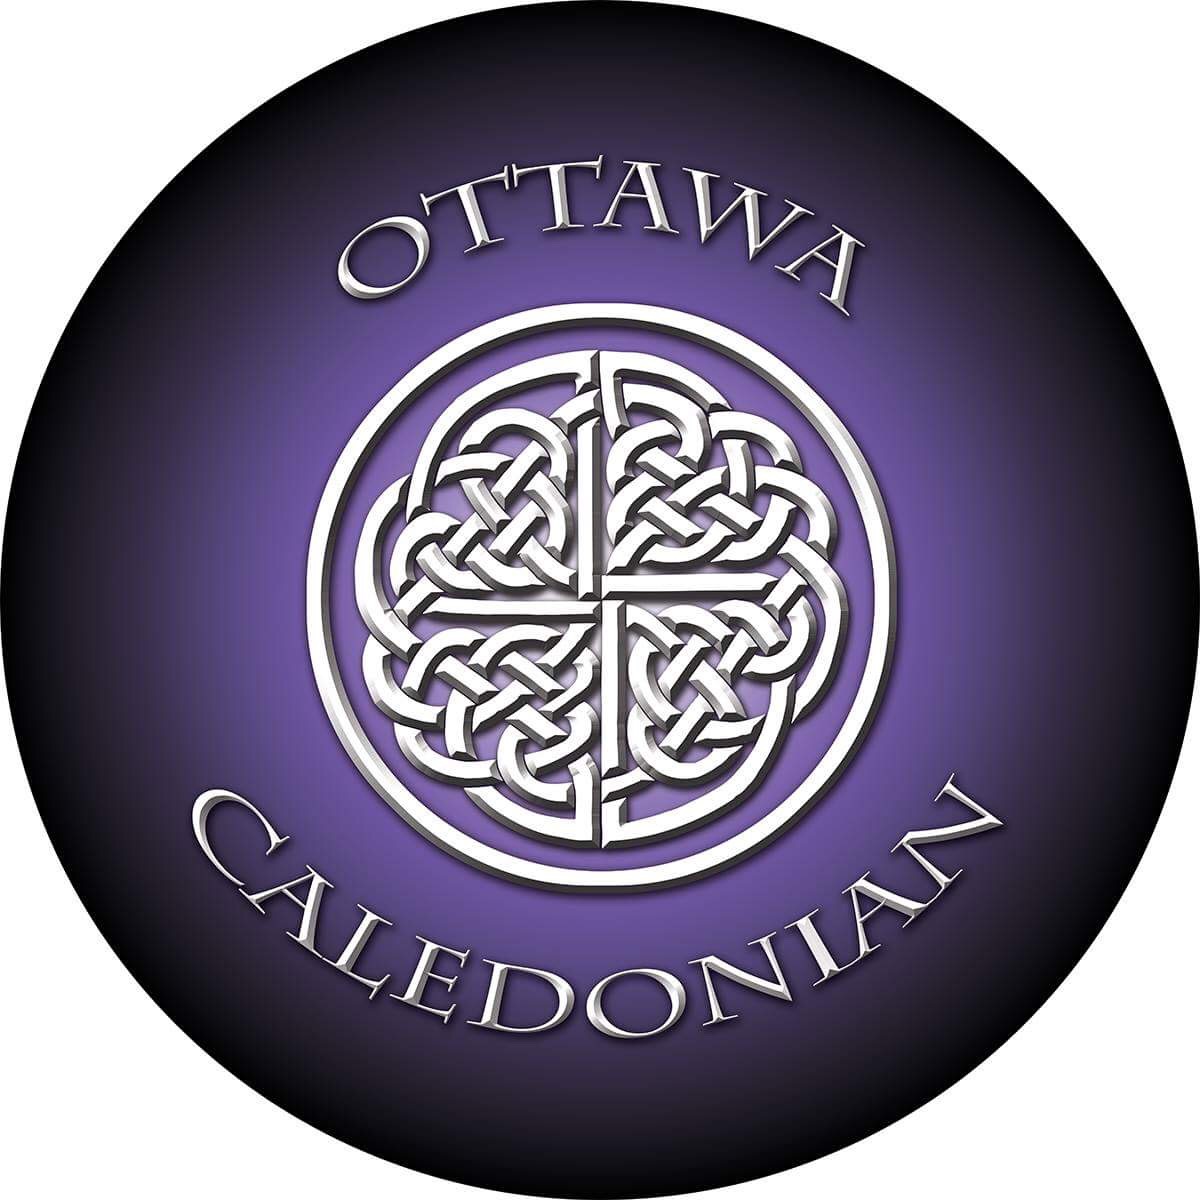 Ottawa Caledonian Pipes & Drums